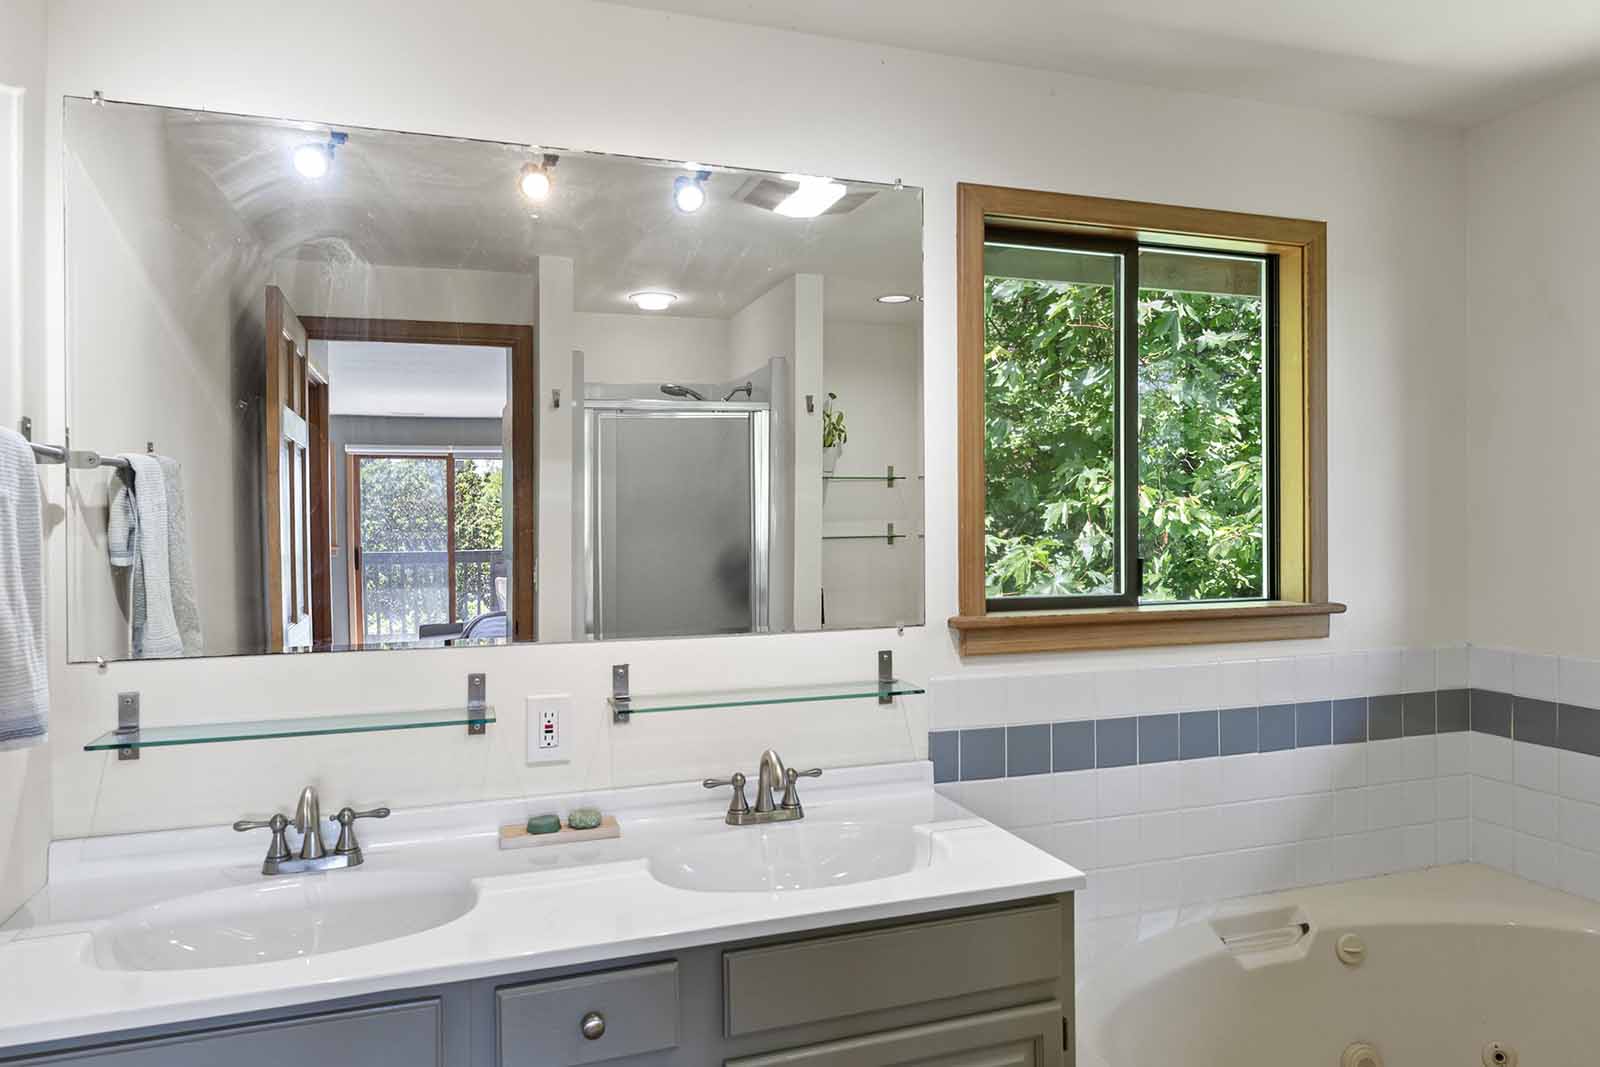 Primary bathroom includes a dual sink vanity, soaking tub and separate shower